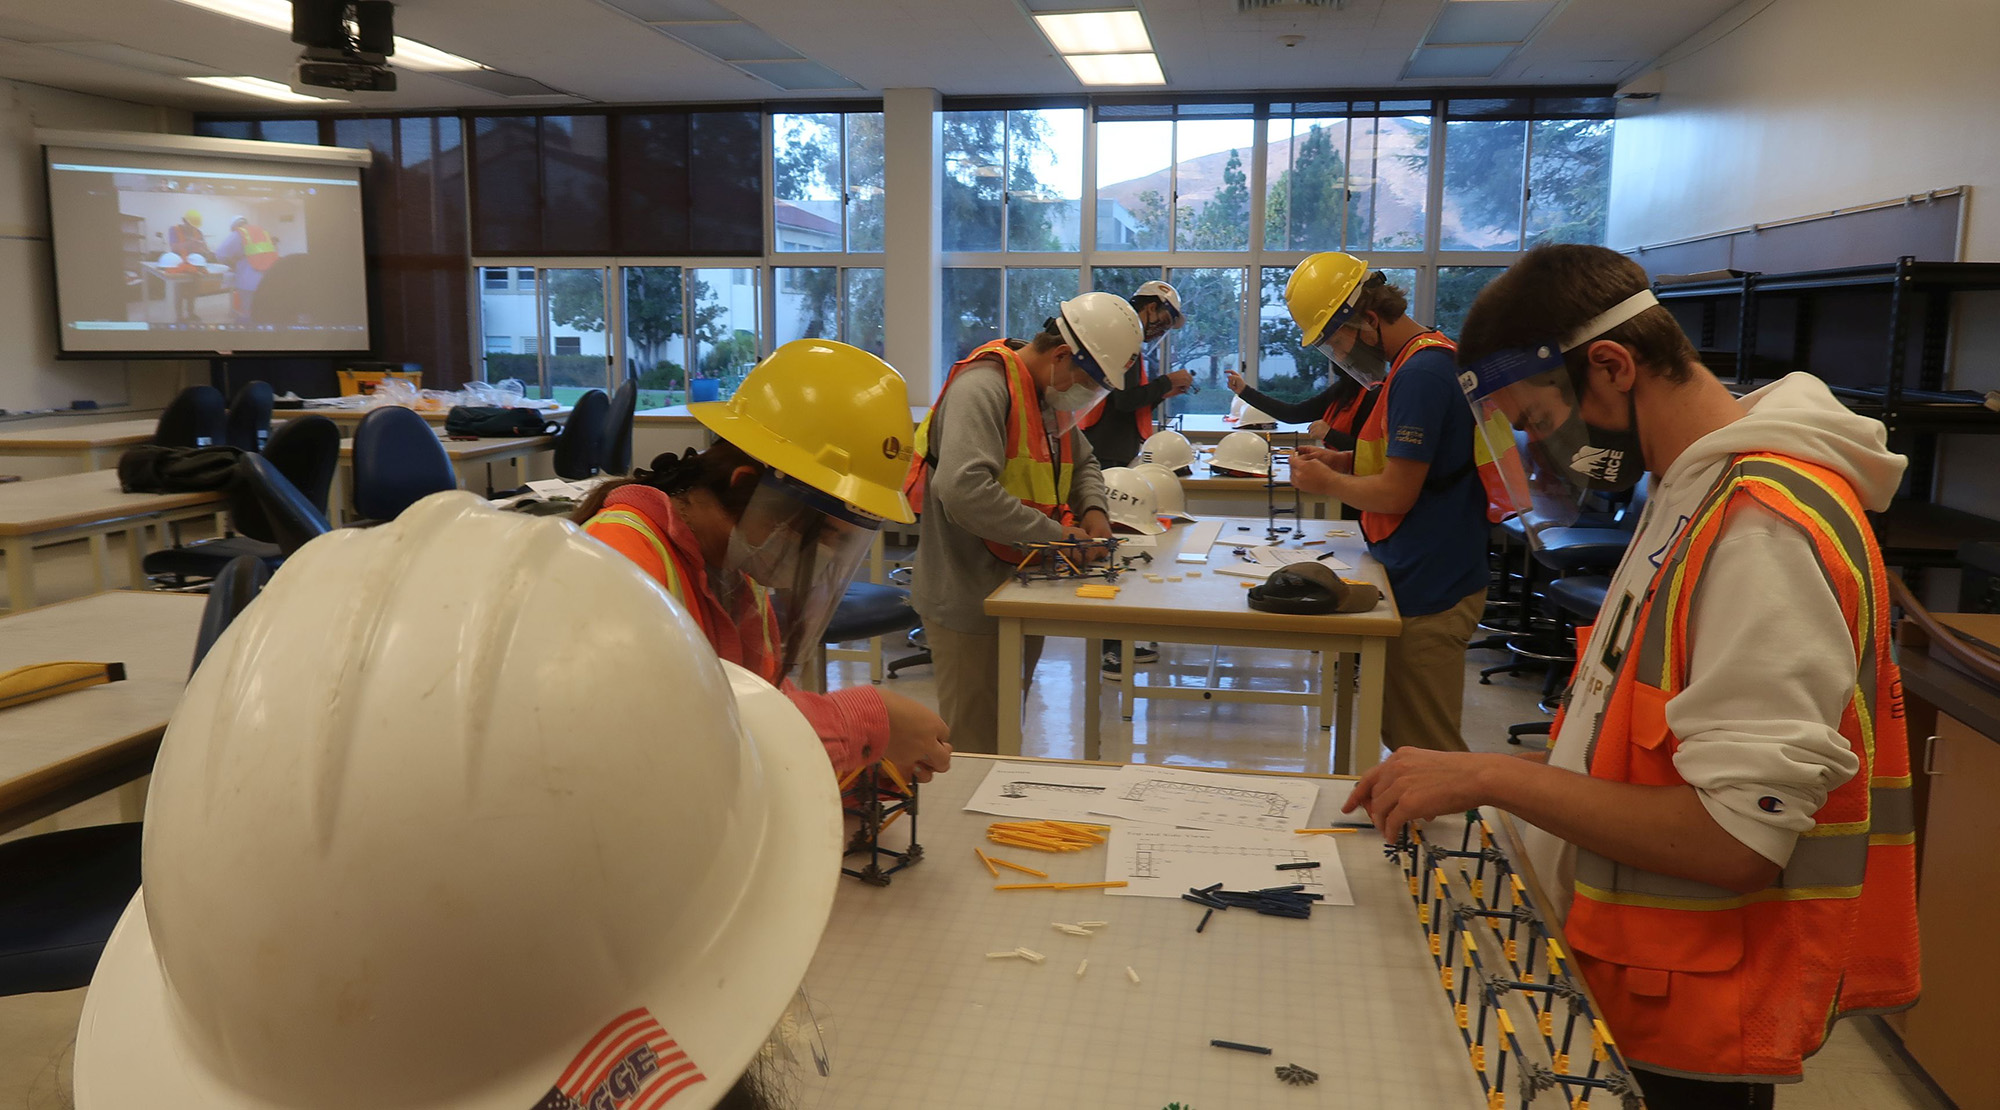 students in safety vests, face shields, and hard hats take part in a design, bid, build exercise where they assemble structures